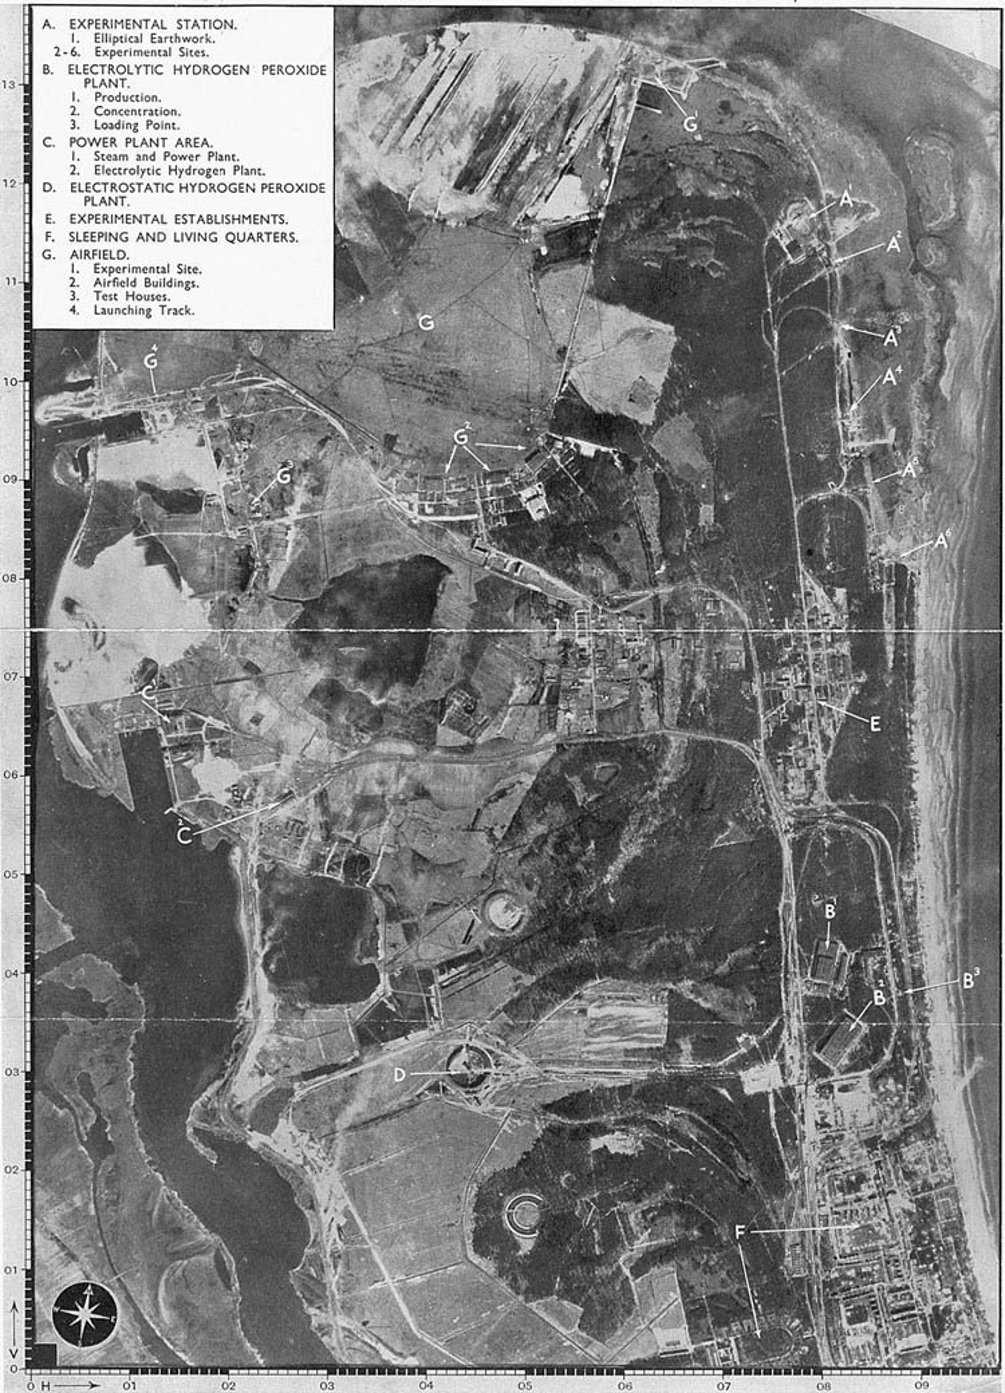 Peenemunde aerial photo showing the facility and annotated as according to the RAF.